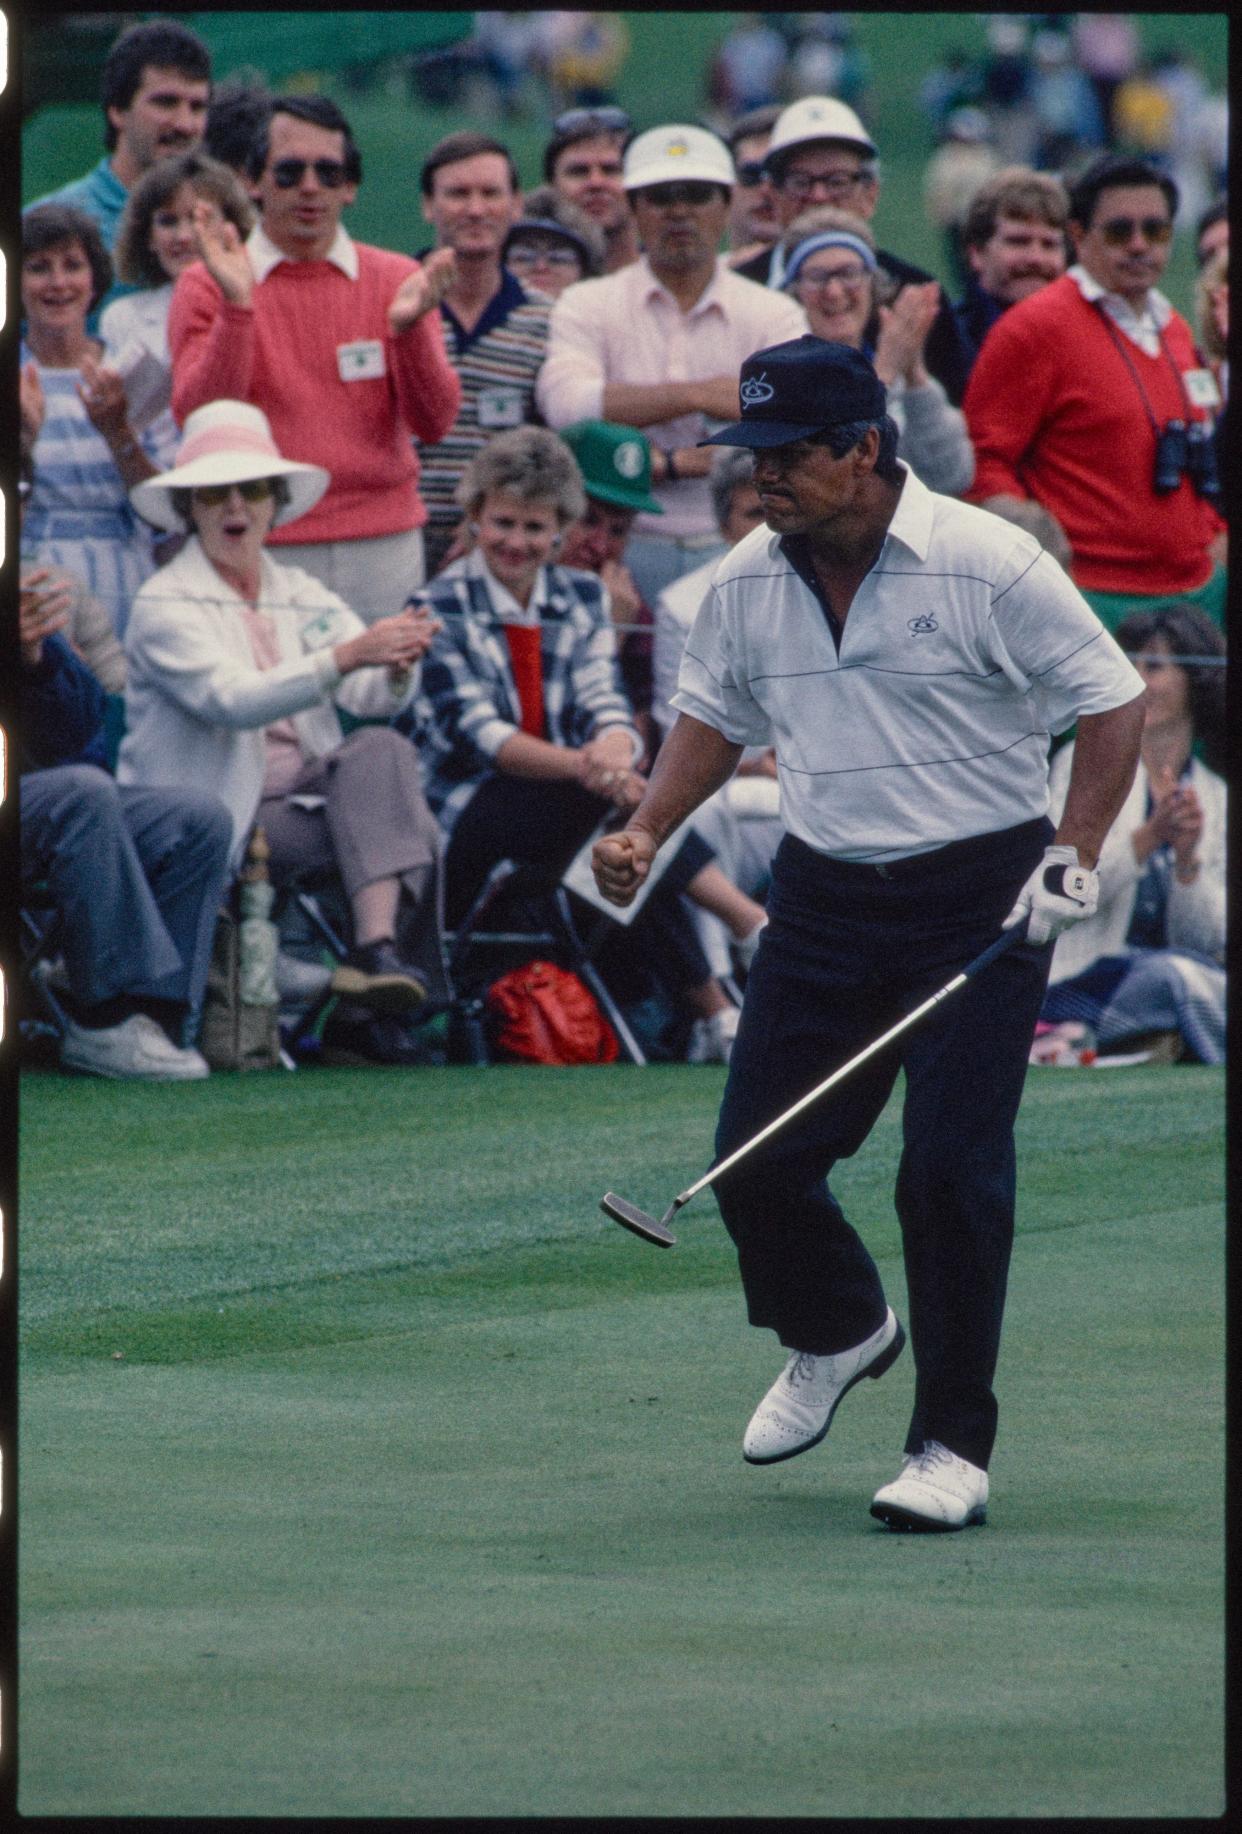 04/14/1985; Augusta, Georgia, USA; Lee Trevino reacts to putt at the Augusta National Golf Course during the 1985 Masters. Mandatory Credit: File Photo -The Augusta Chronicle via USA TODAY NETWORK